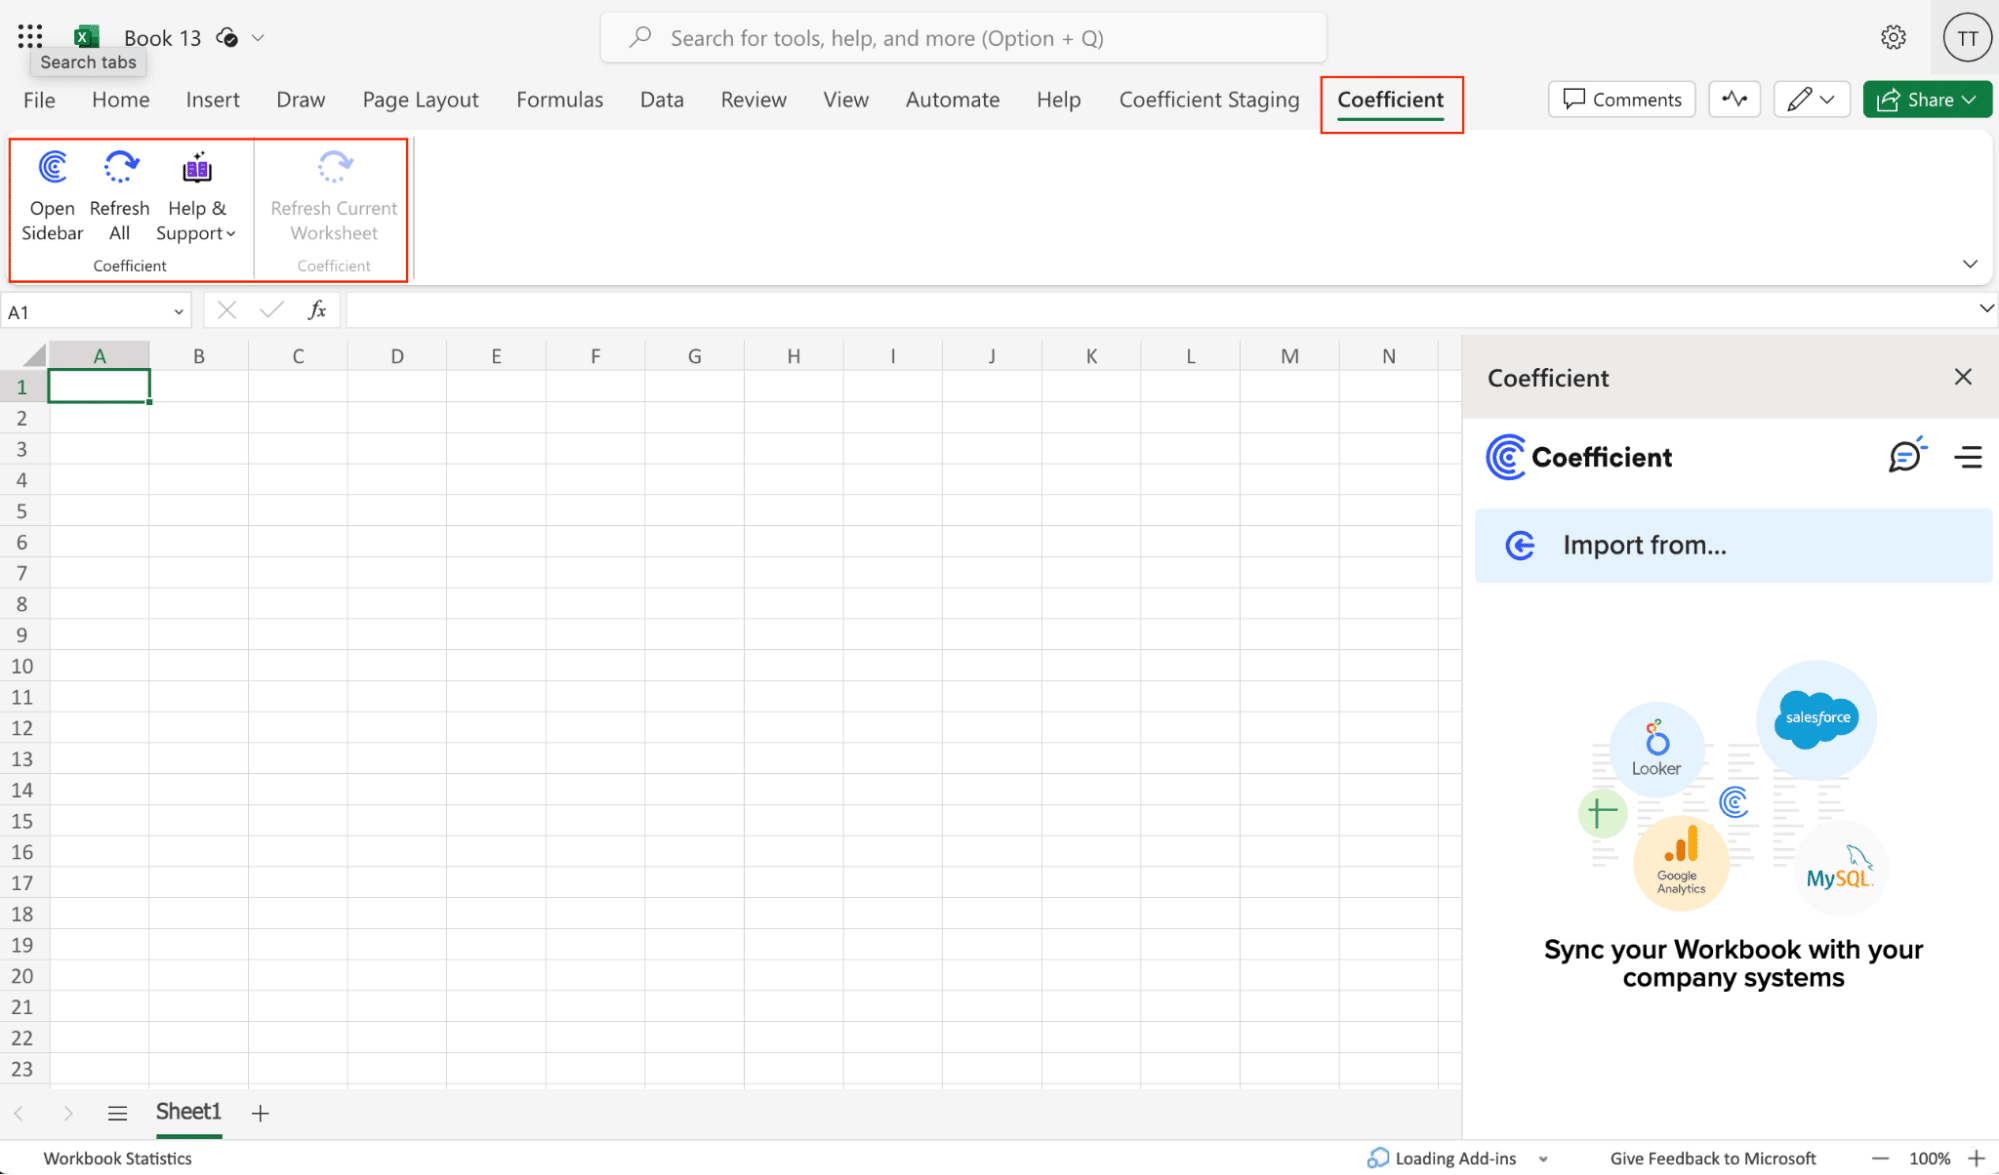 Coefficient tab appearing in Excel's top navigation upon installation completion.